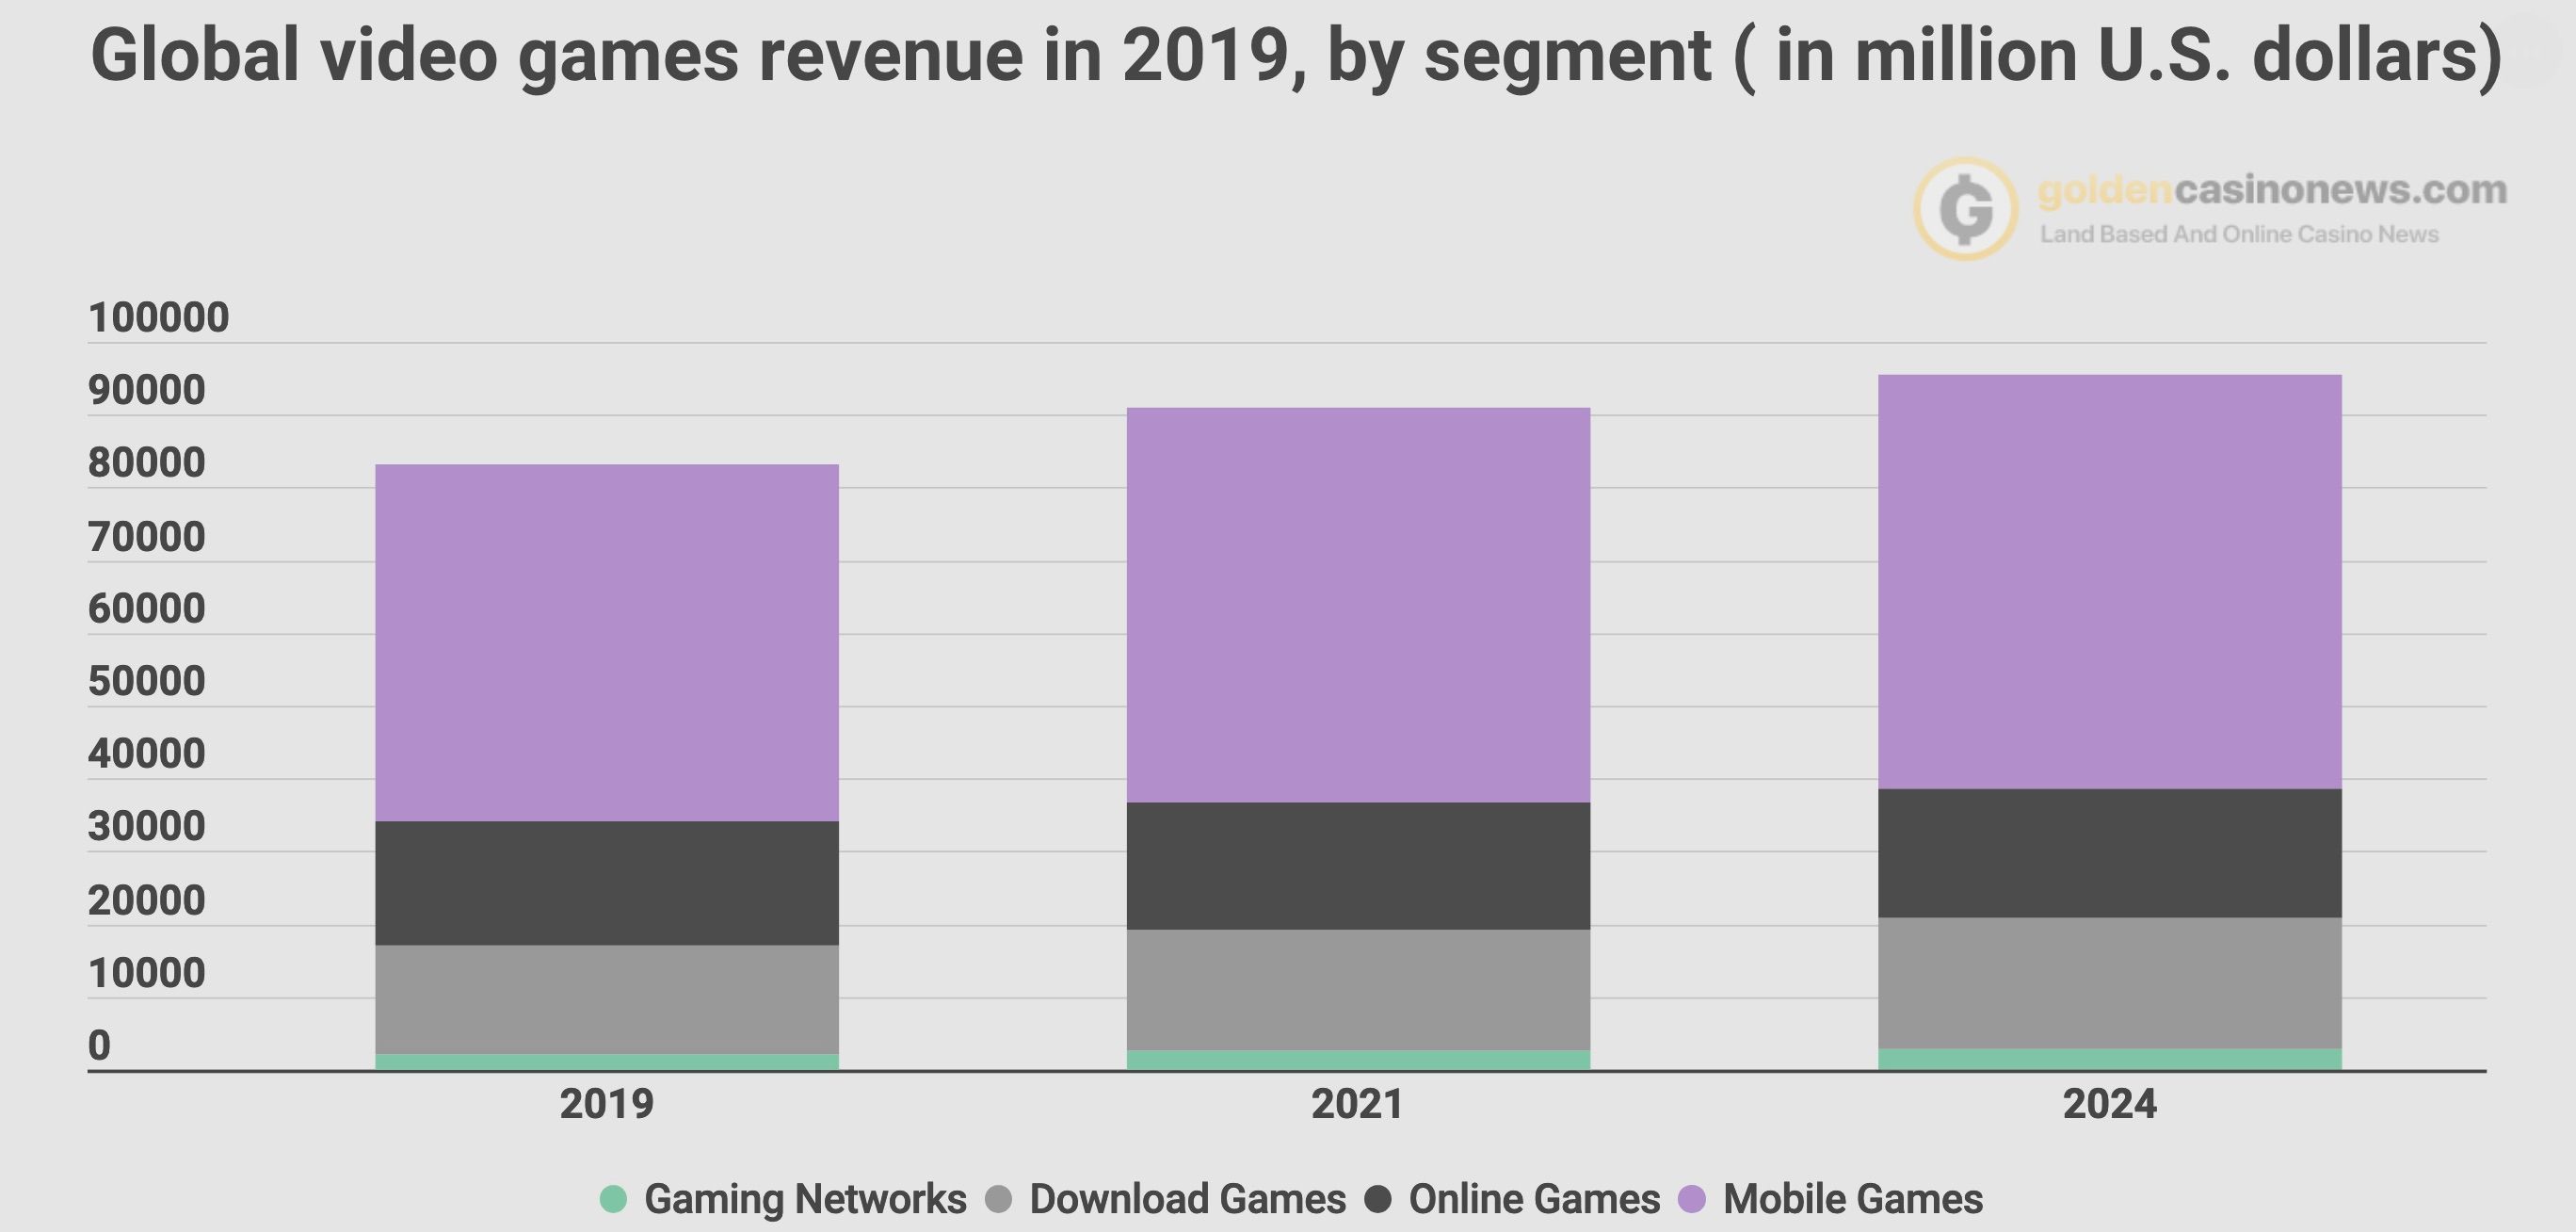 free download the rise of gaming revenue visualized